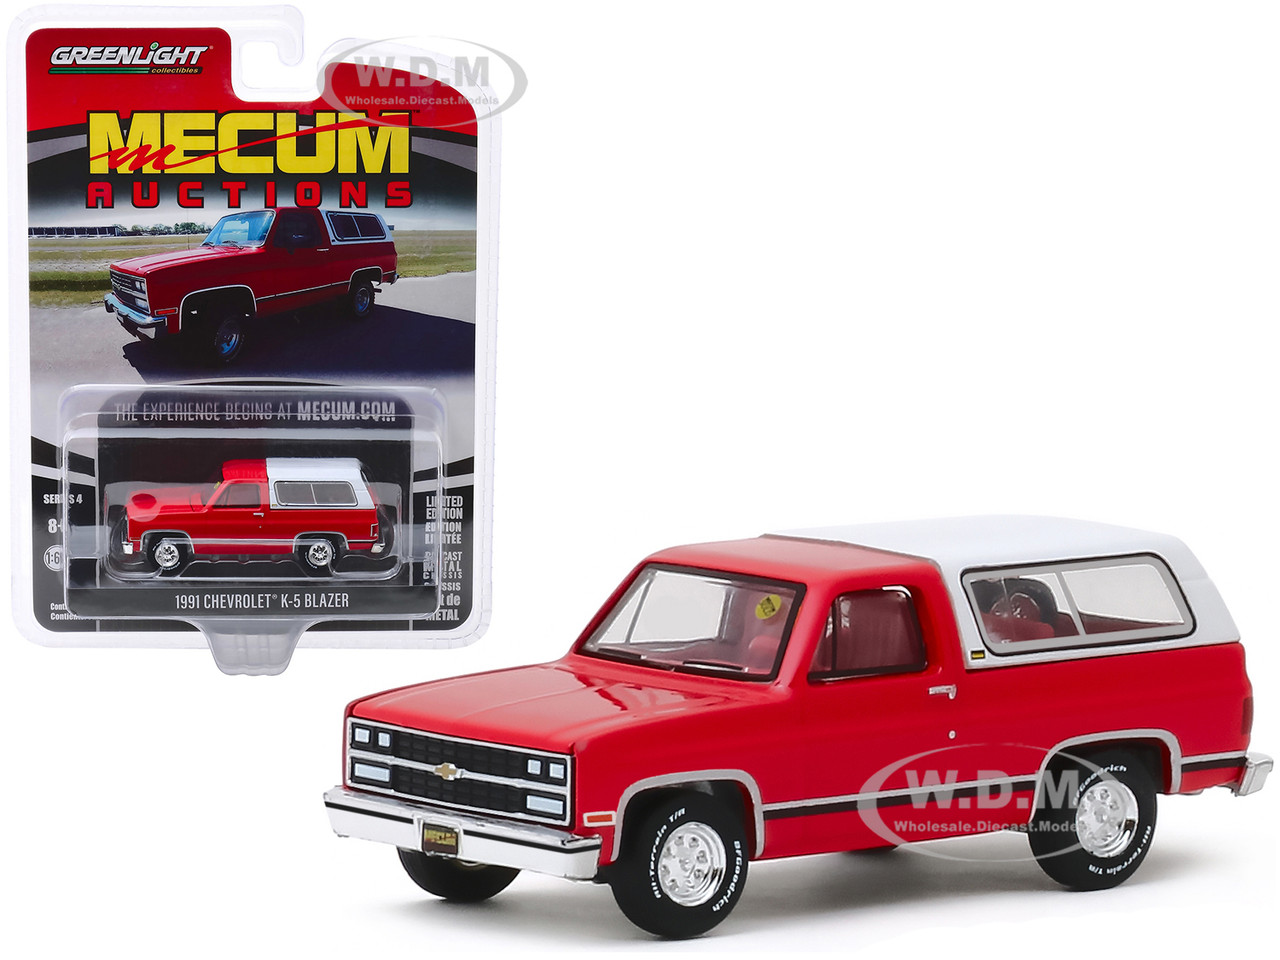 1991 Chevrolet K 5 Blazer Red And White With Red Interior Houston 2019 Mecum Auctions Collector Cars Series 4 1 64 Diecast Model Car By Greenlight